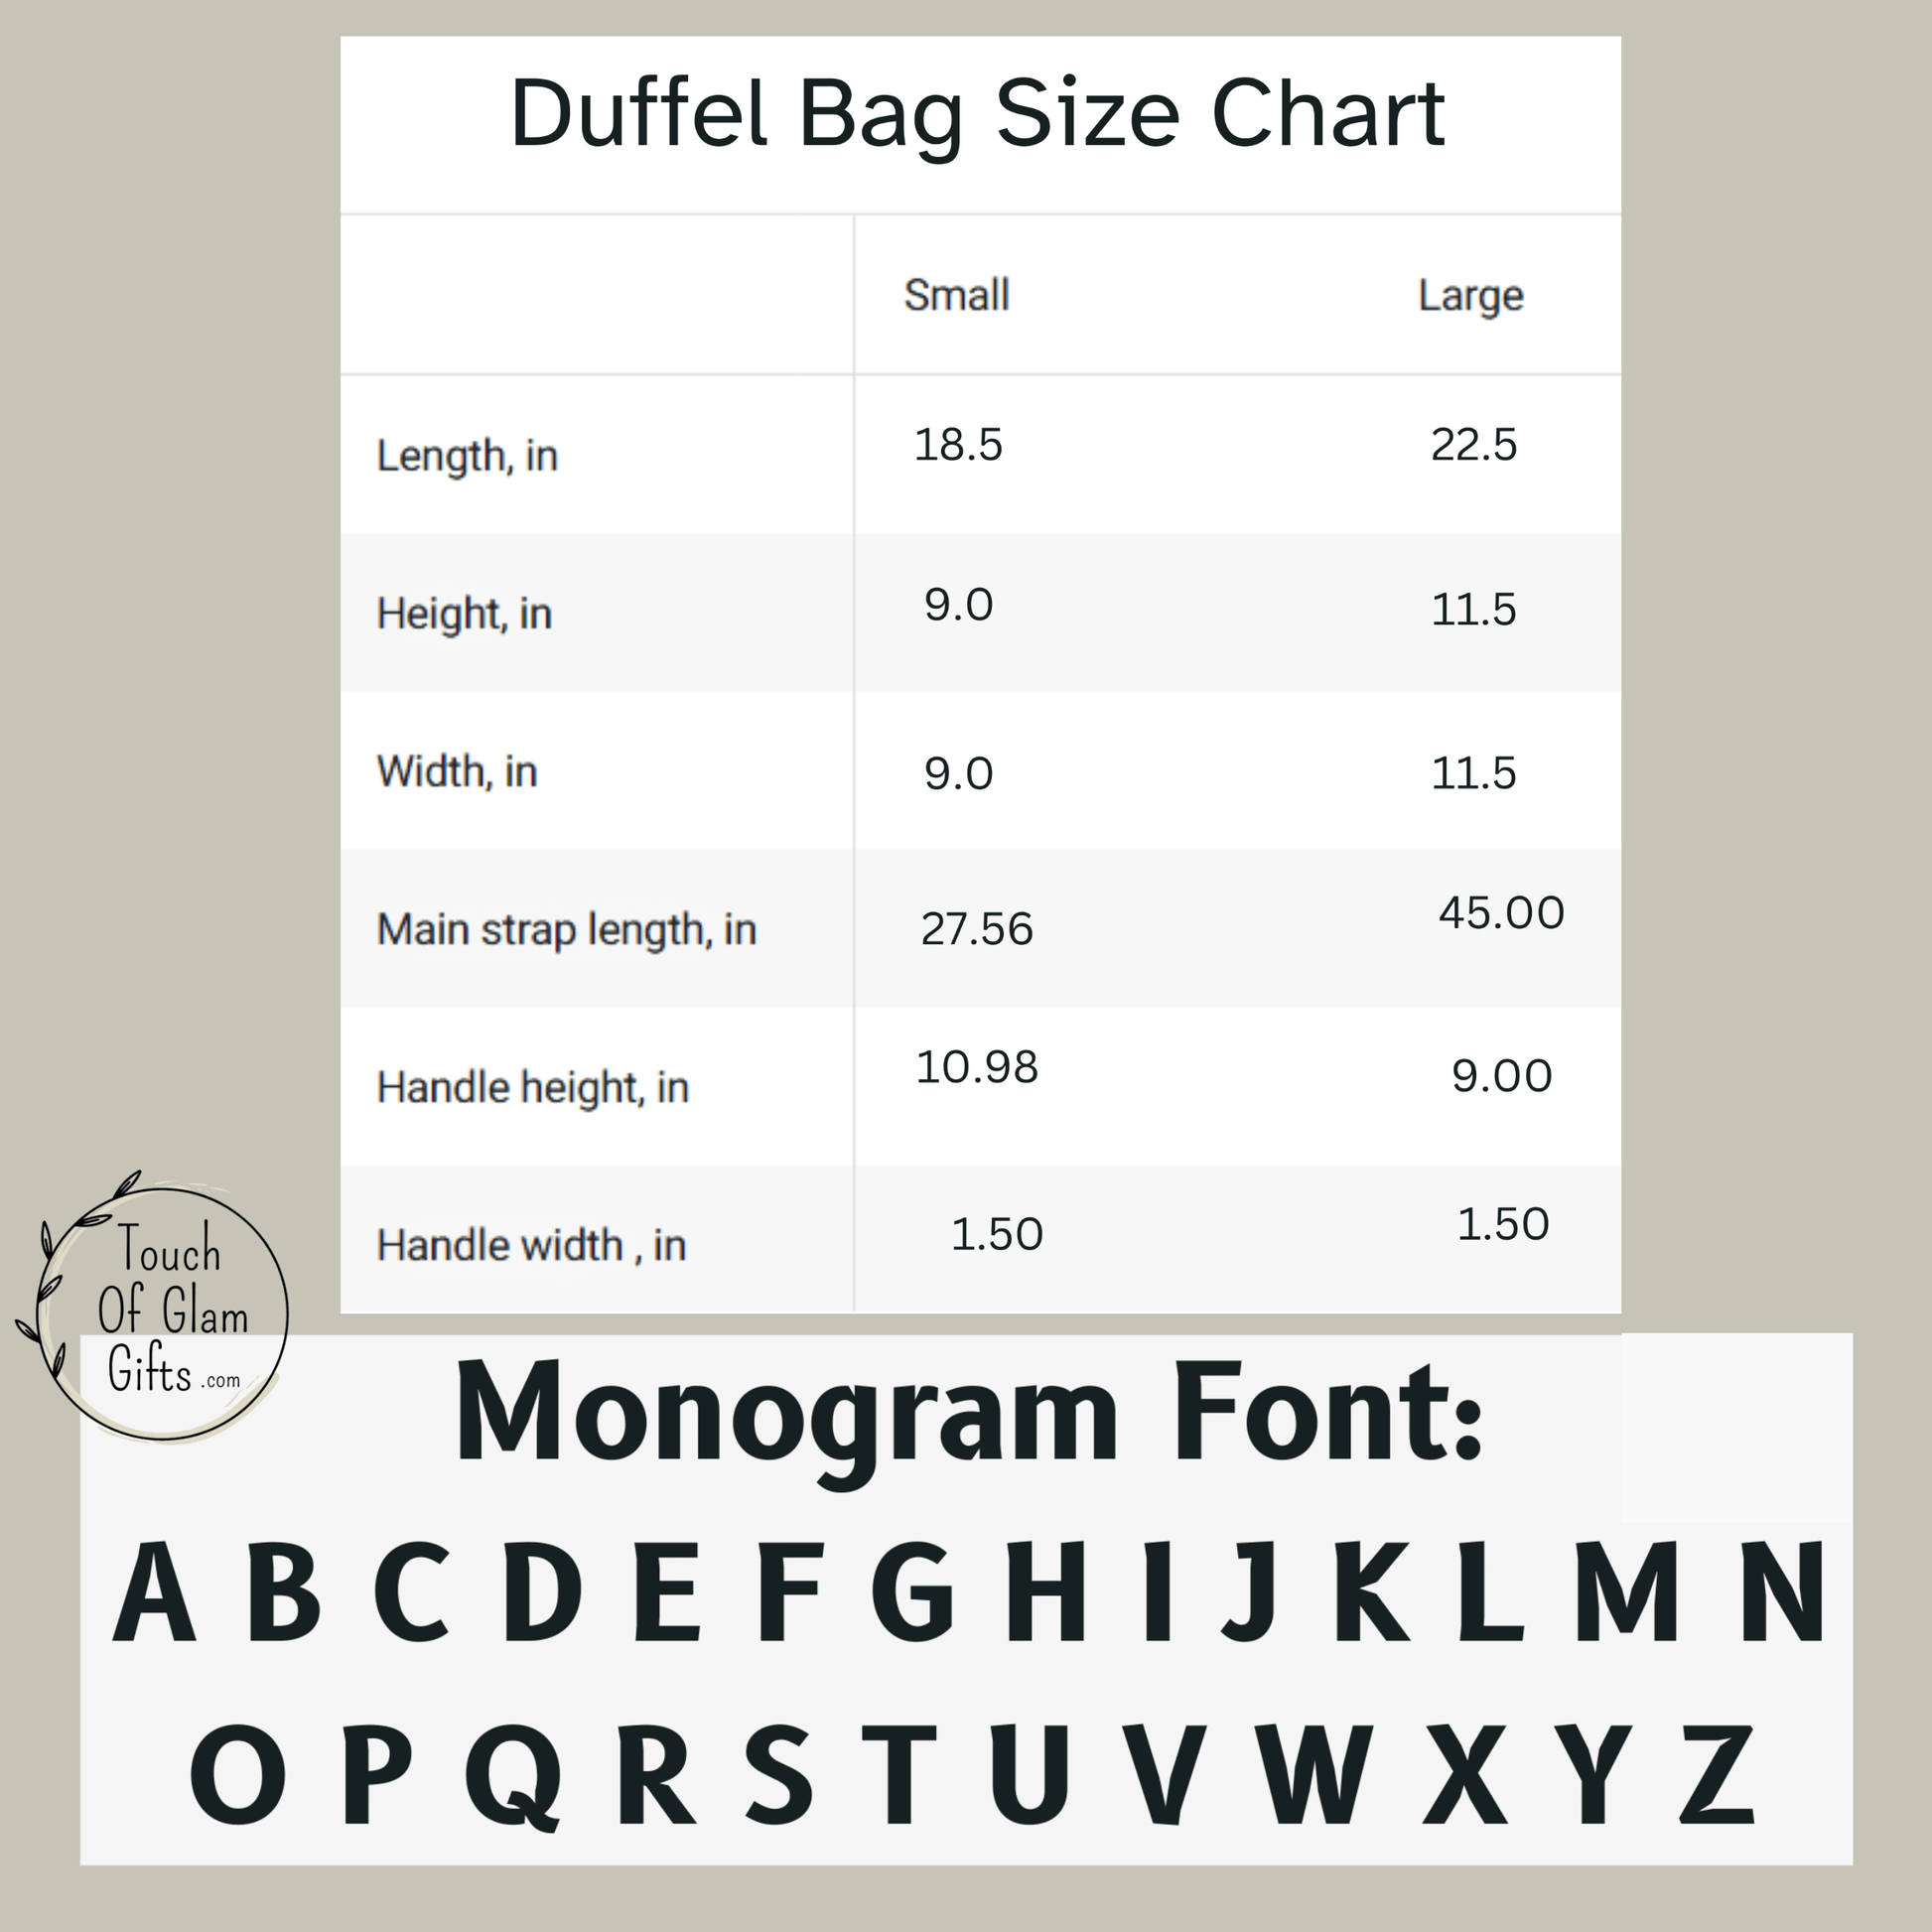 the size chart for the small duffel bag and large along with the alphabet for the monogrammed initials.